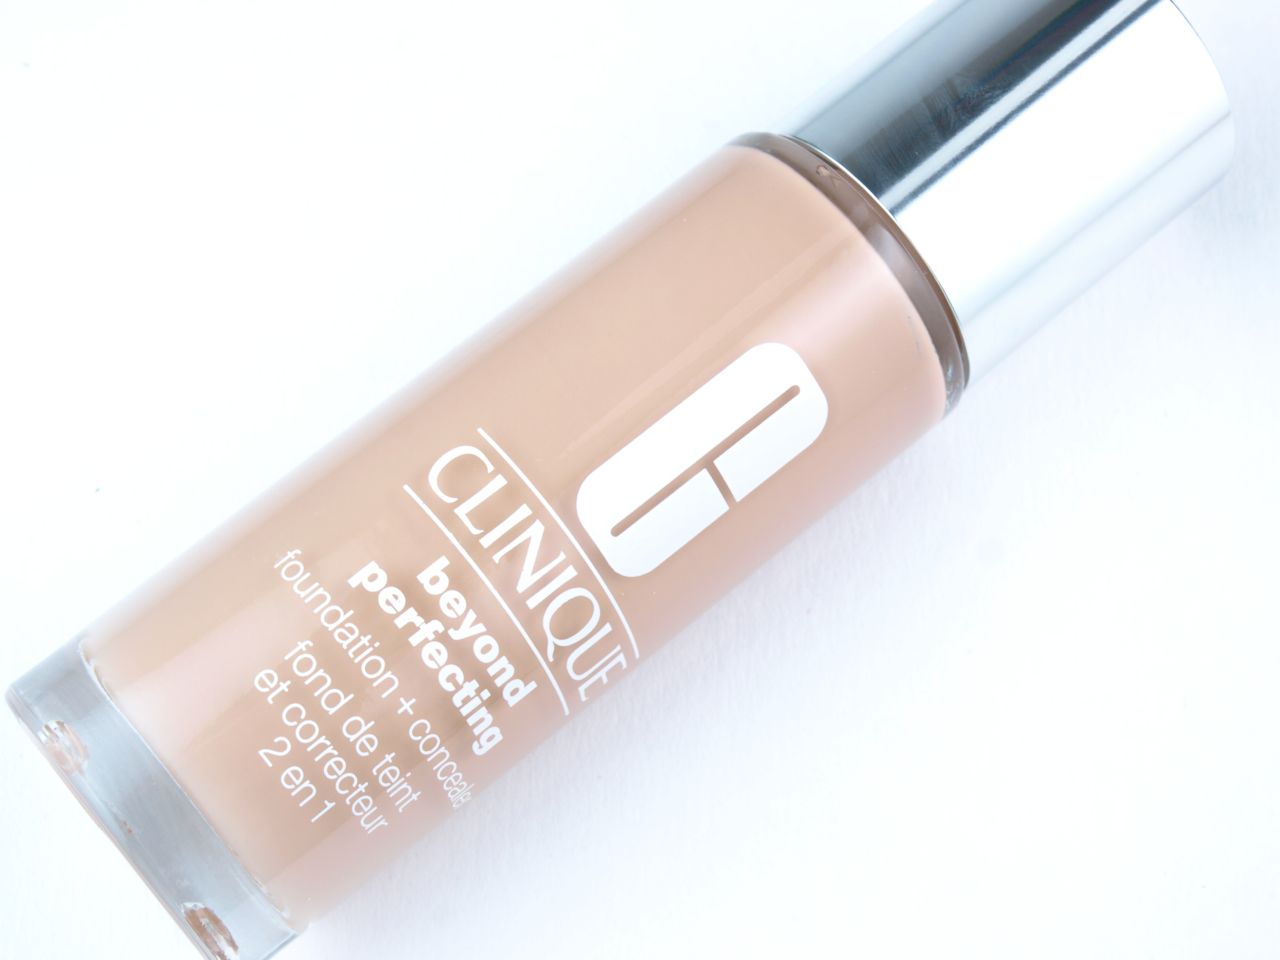 Clinique Beyond Perfecting Foundation + Concealer in "6 Ivory": Review and Swatches